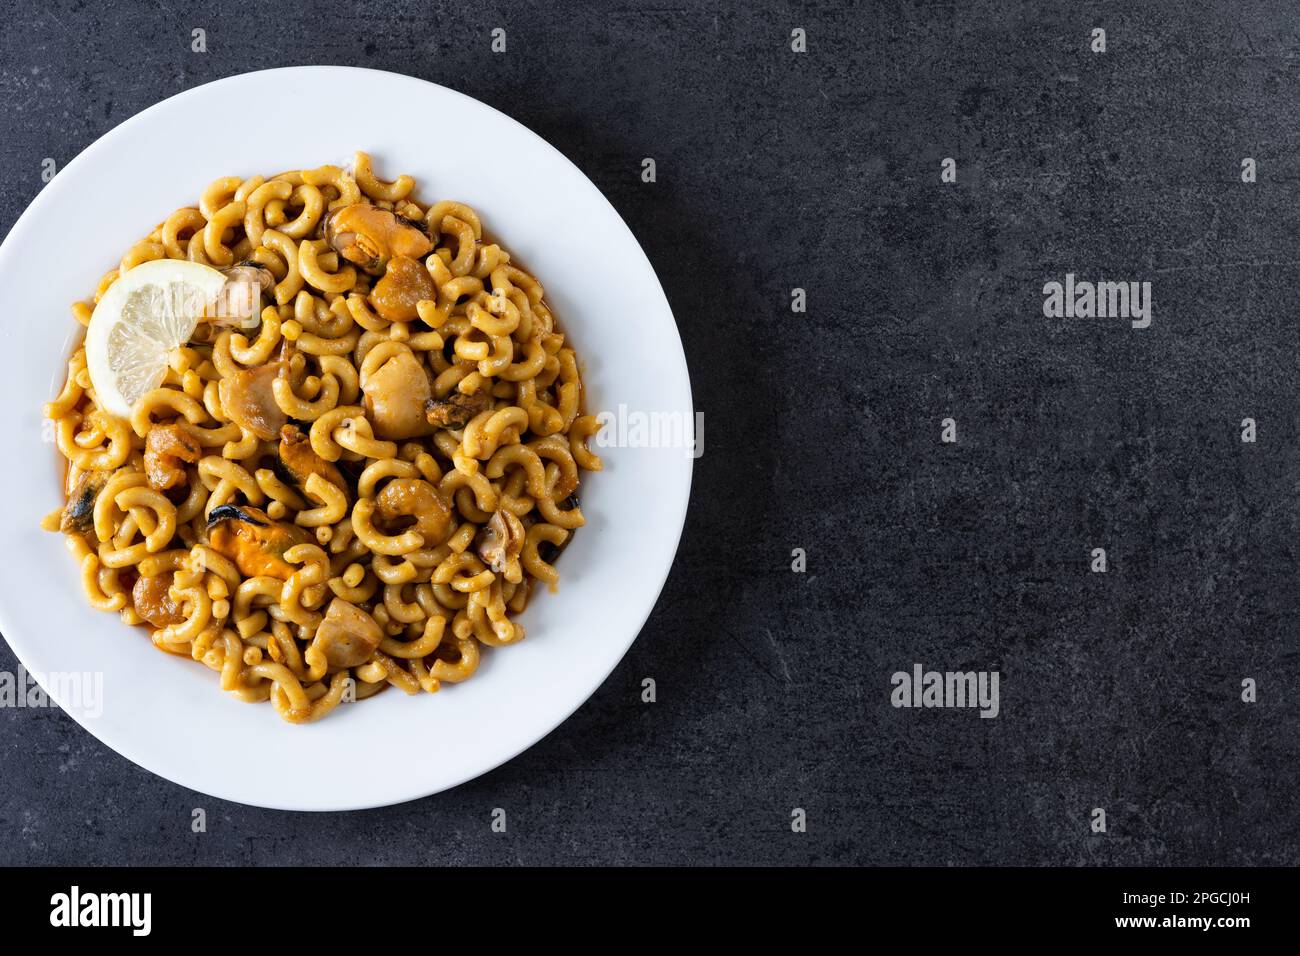 a spanish fideua, a typical noodles casserole with seafood Stock Photo -  Alamy